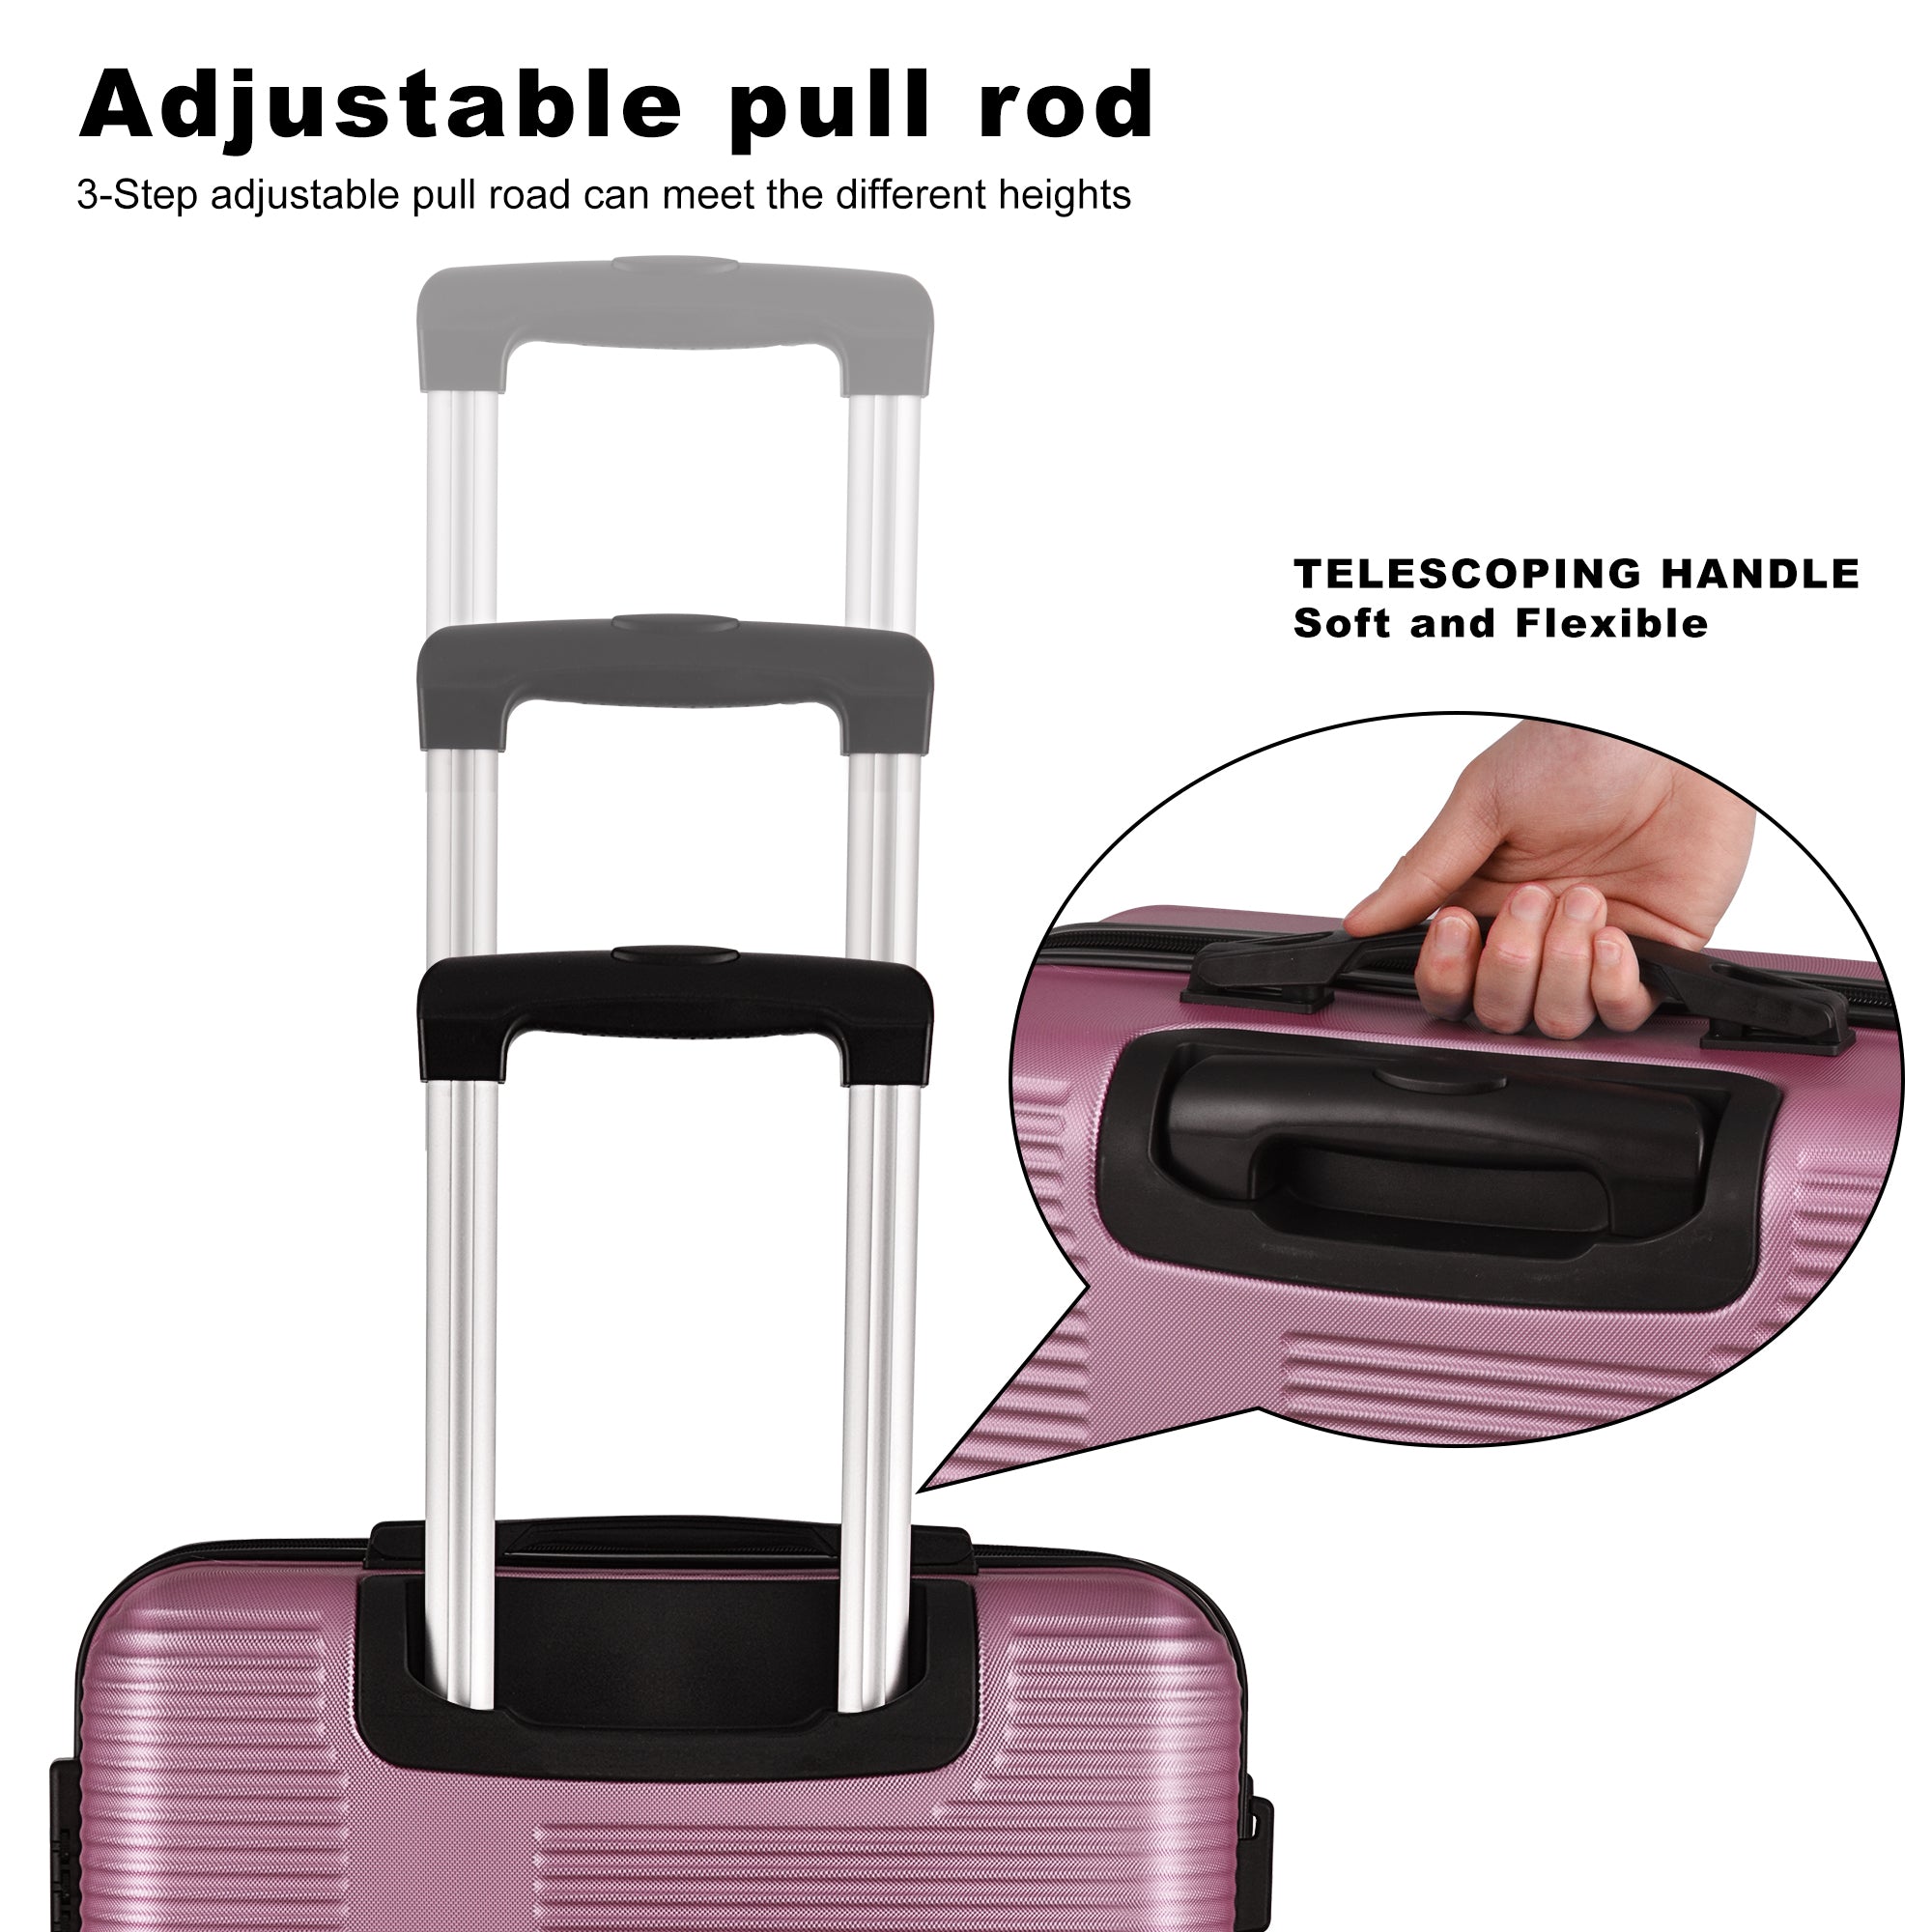 3 Piece Luggage with TSA Lock ABS, Durable Luggage pink-abs